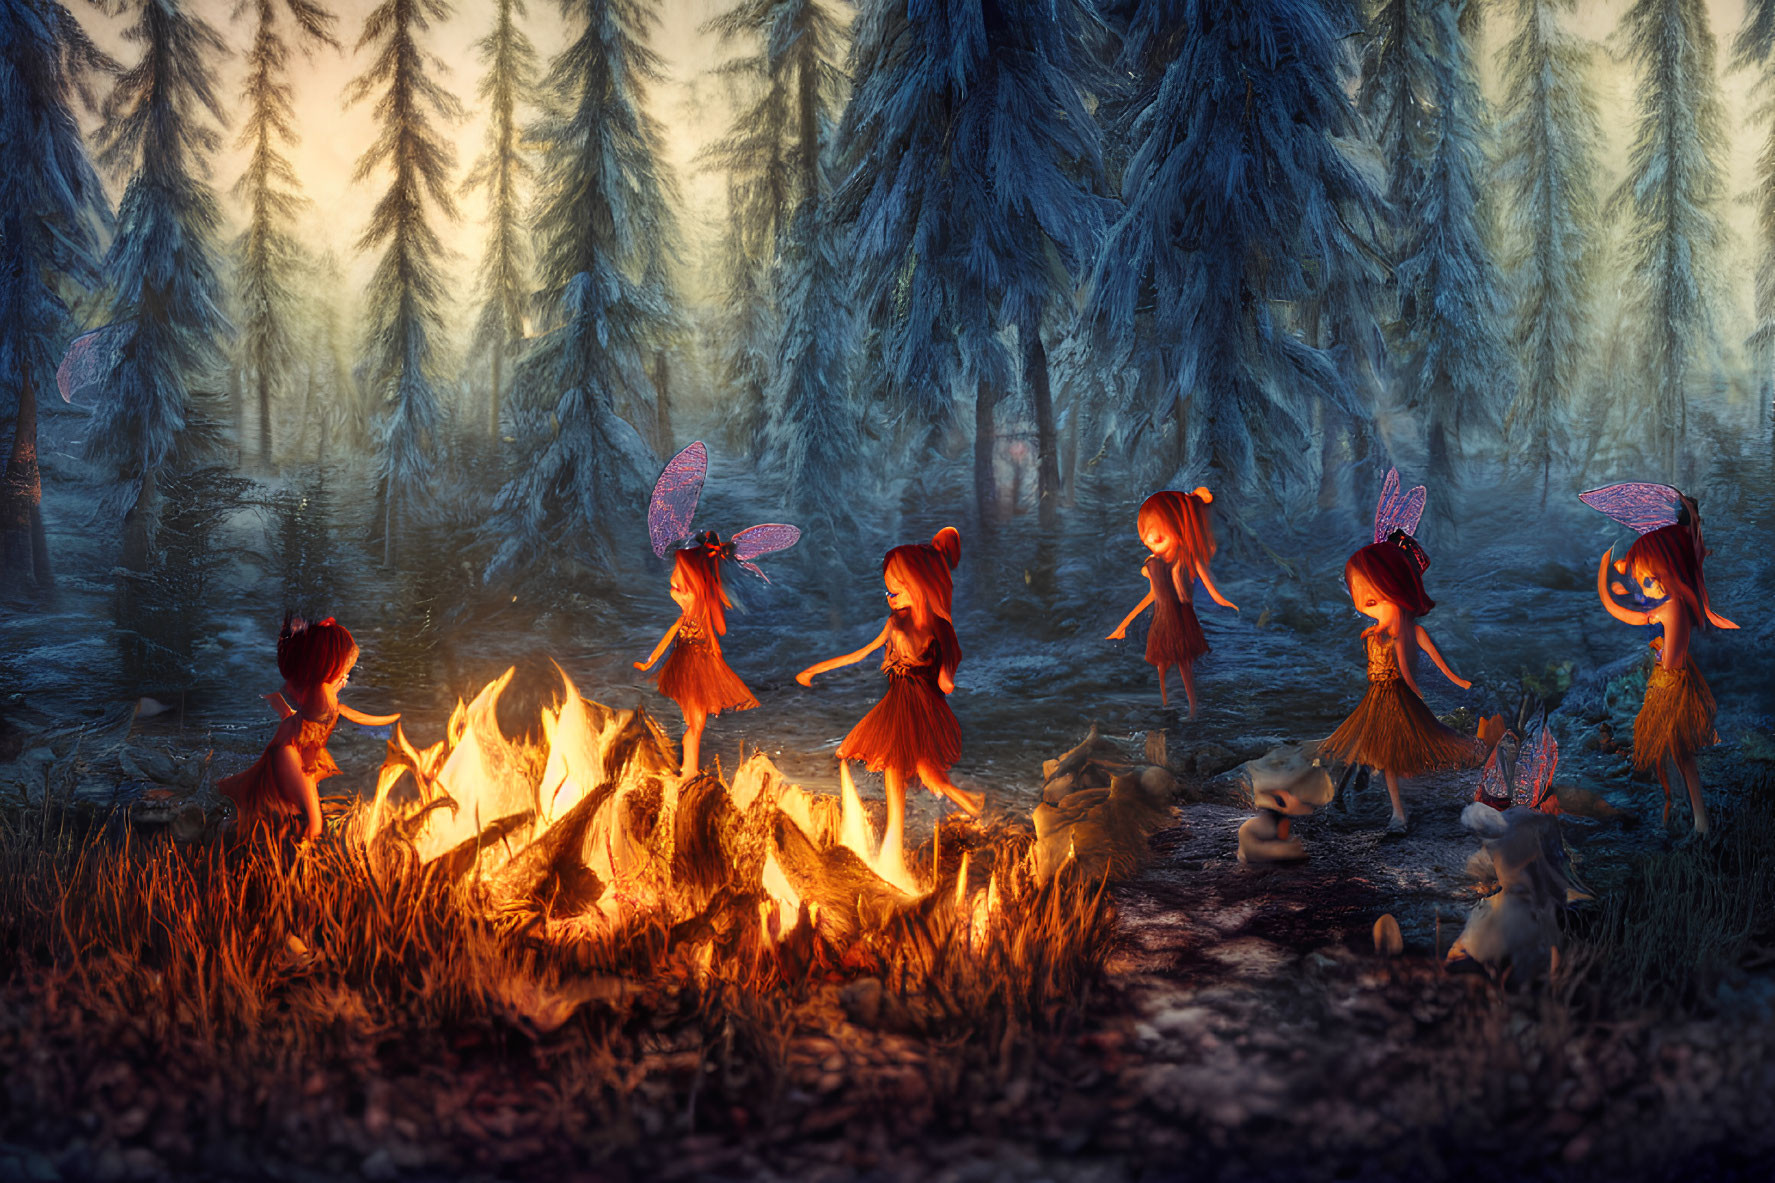 Whimsical fairies with glowing wings dancing in enchanted forest at twilight